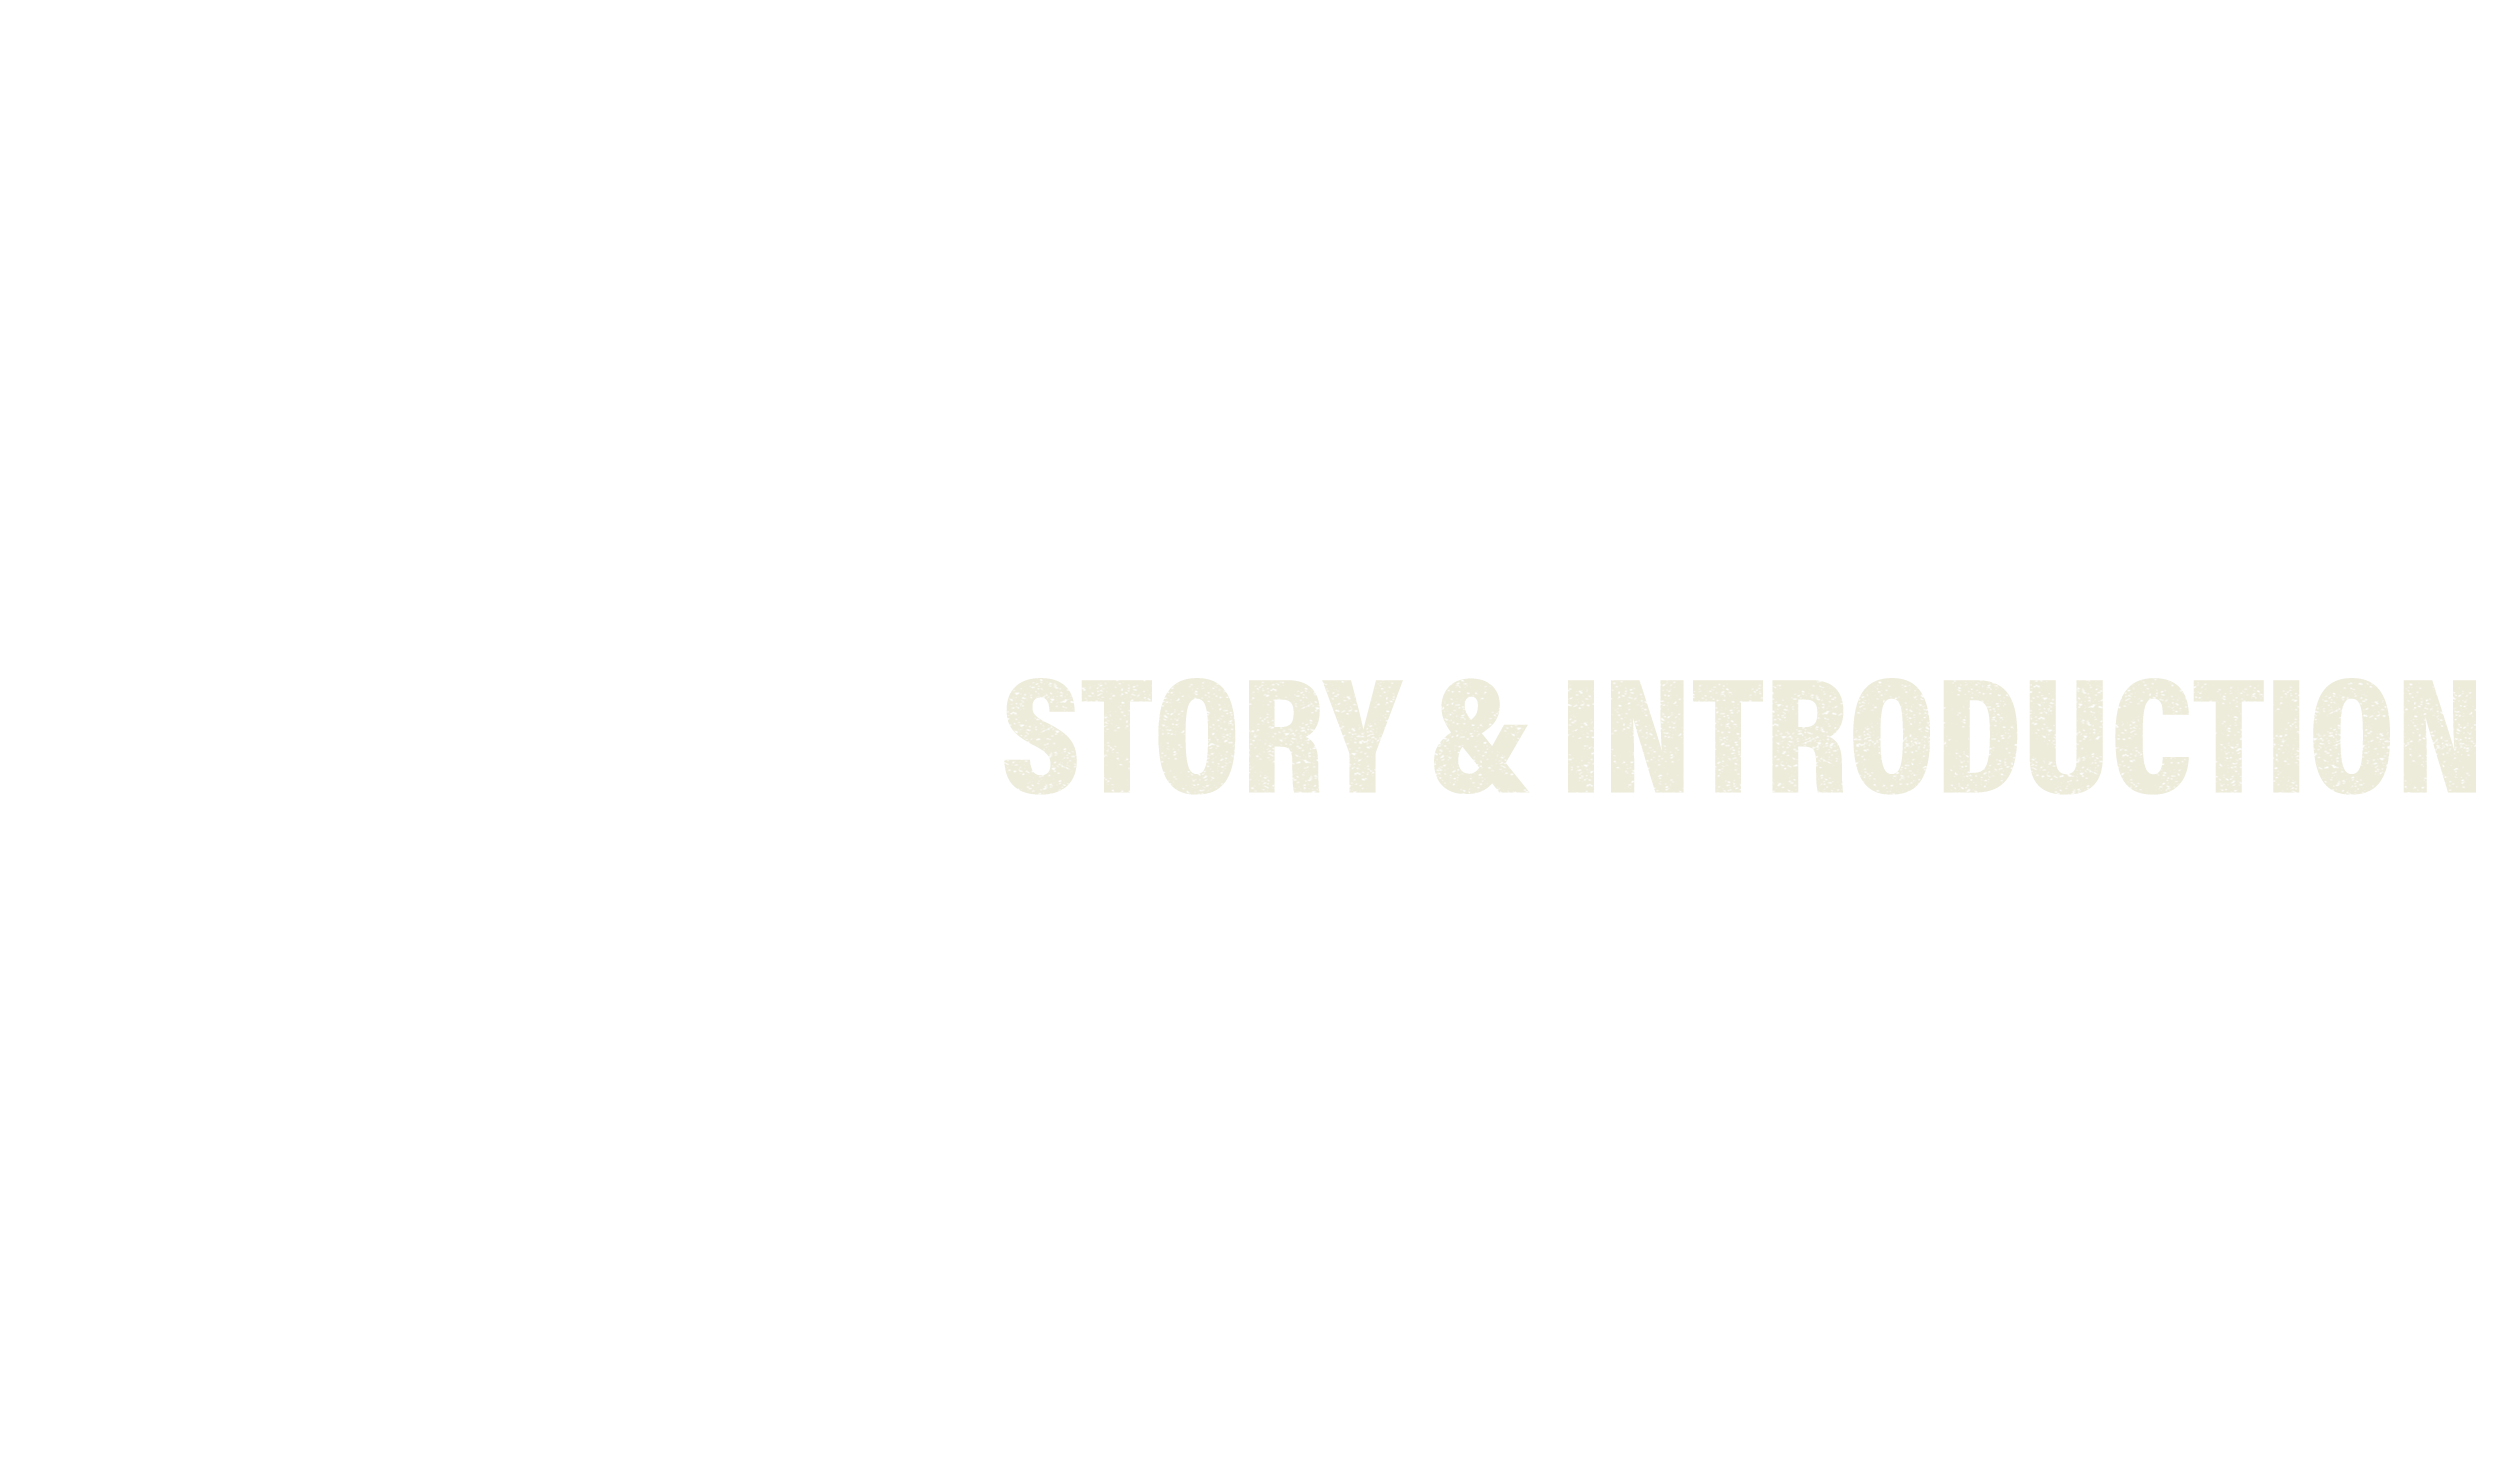 Story & Introduction